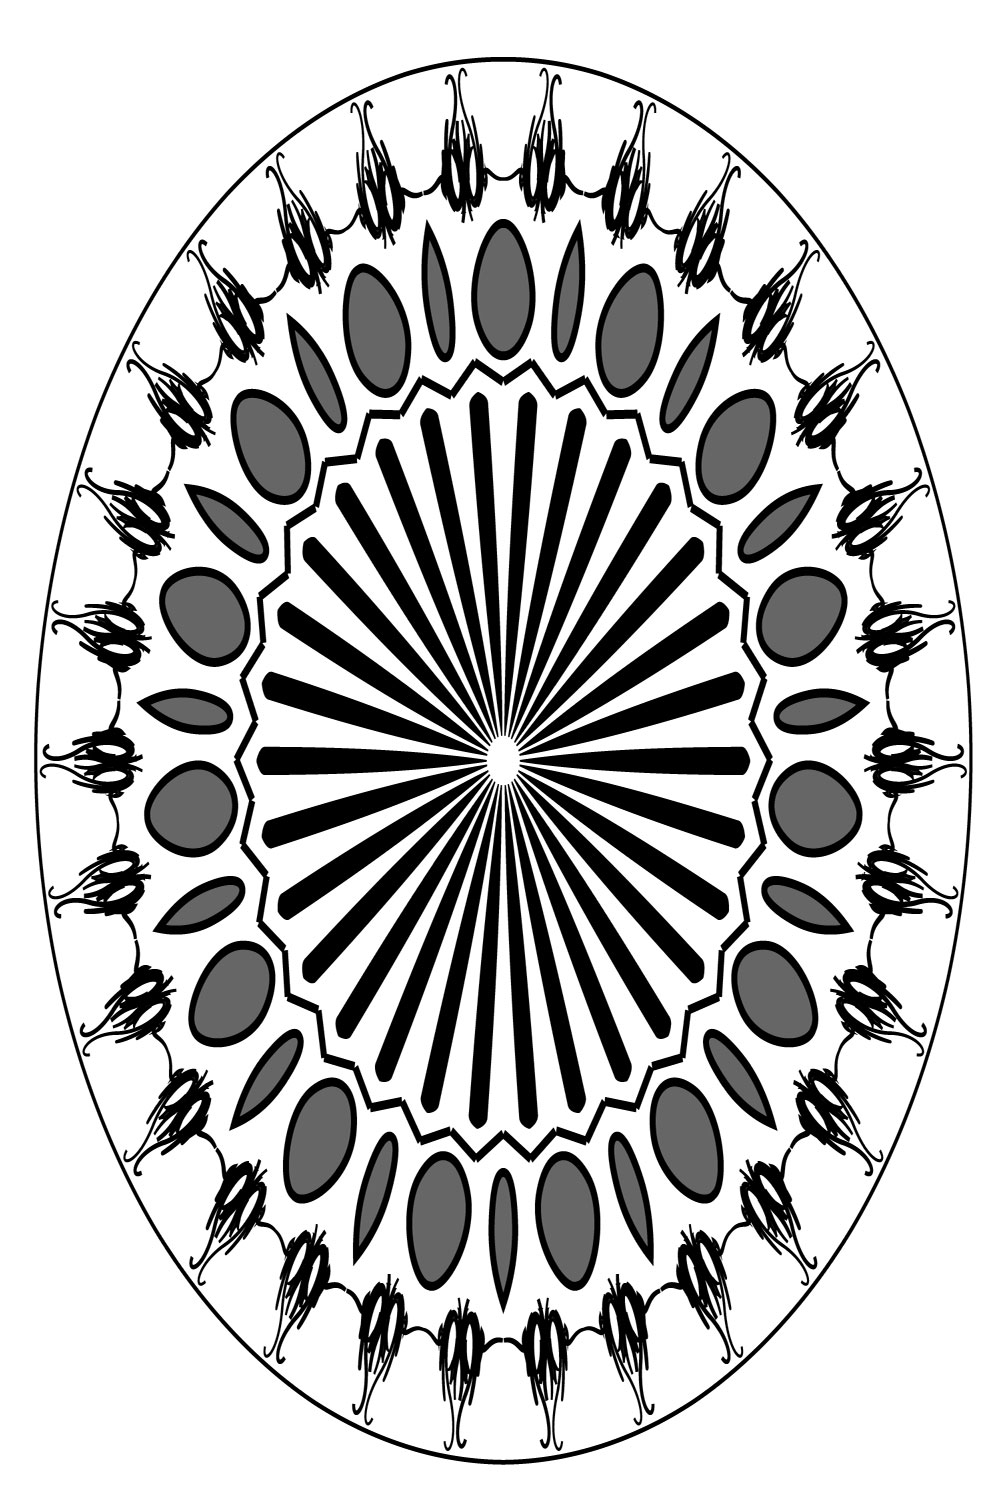 Mandala-Art-with-black-spiral-in-white-background pinterest preview image.